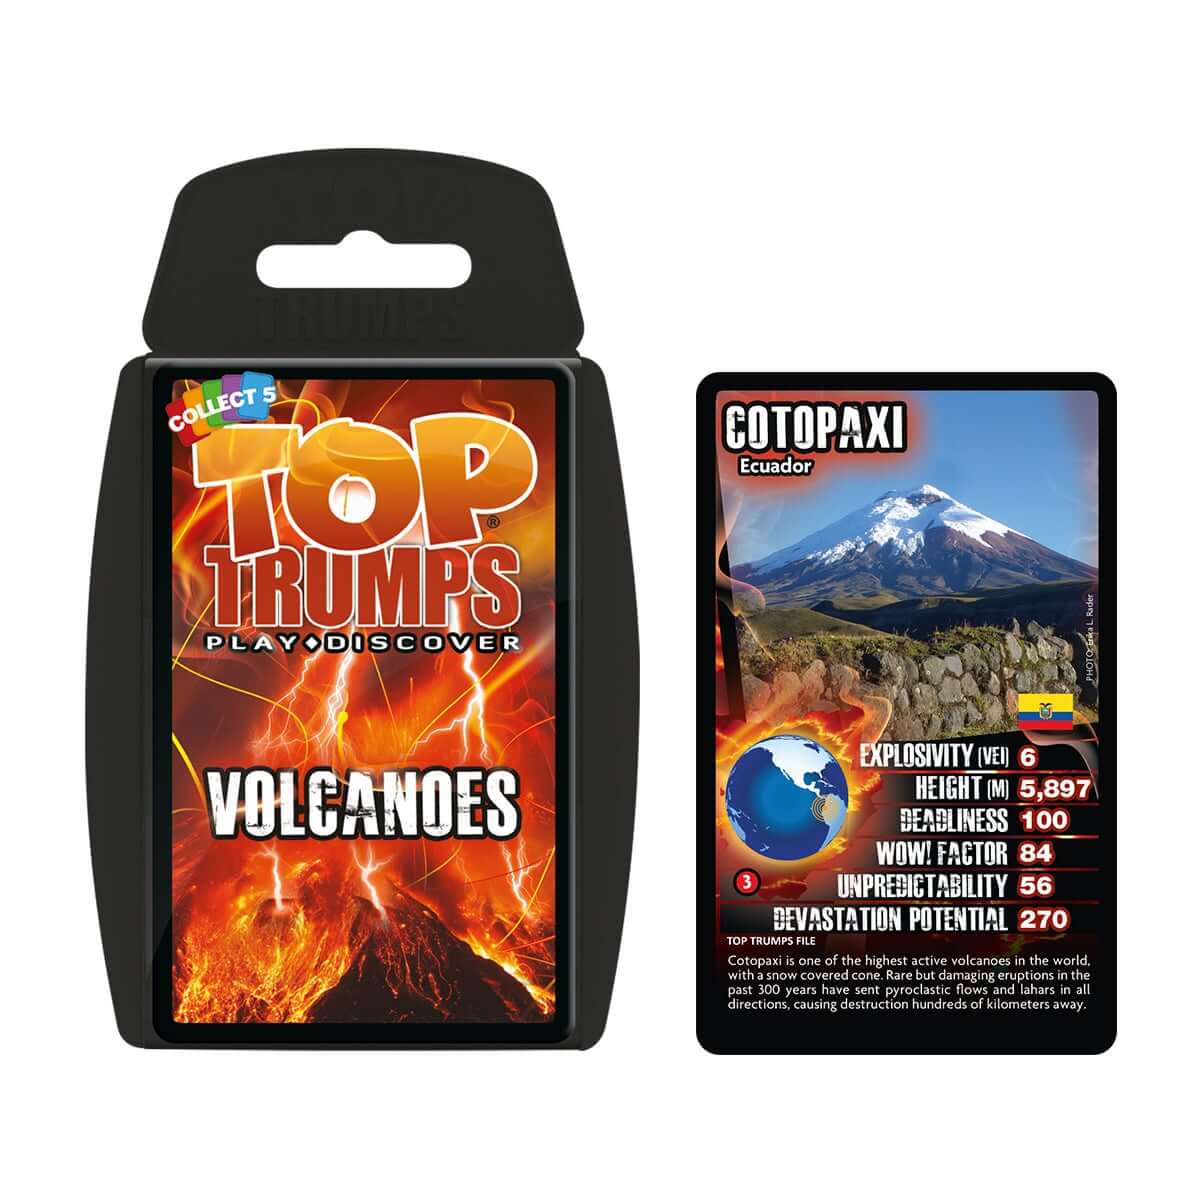 Earth and Space Top Trumps Card Game Bundle